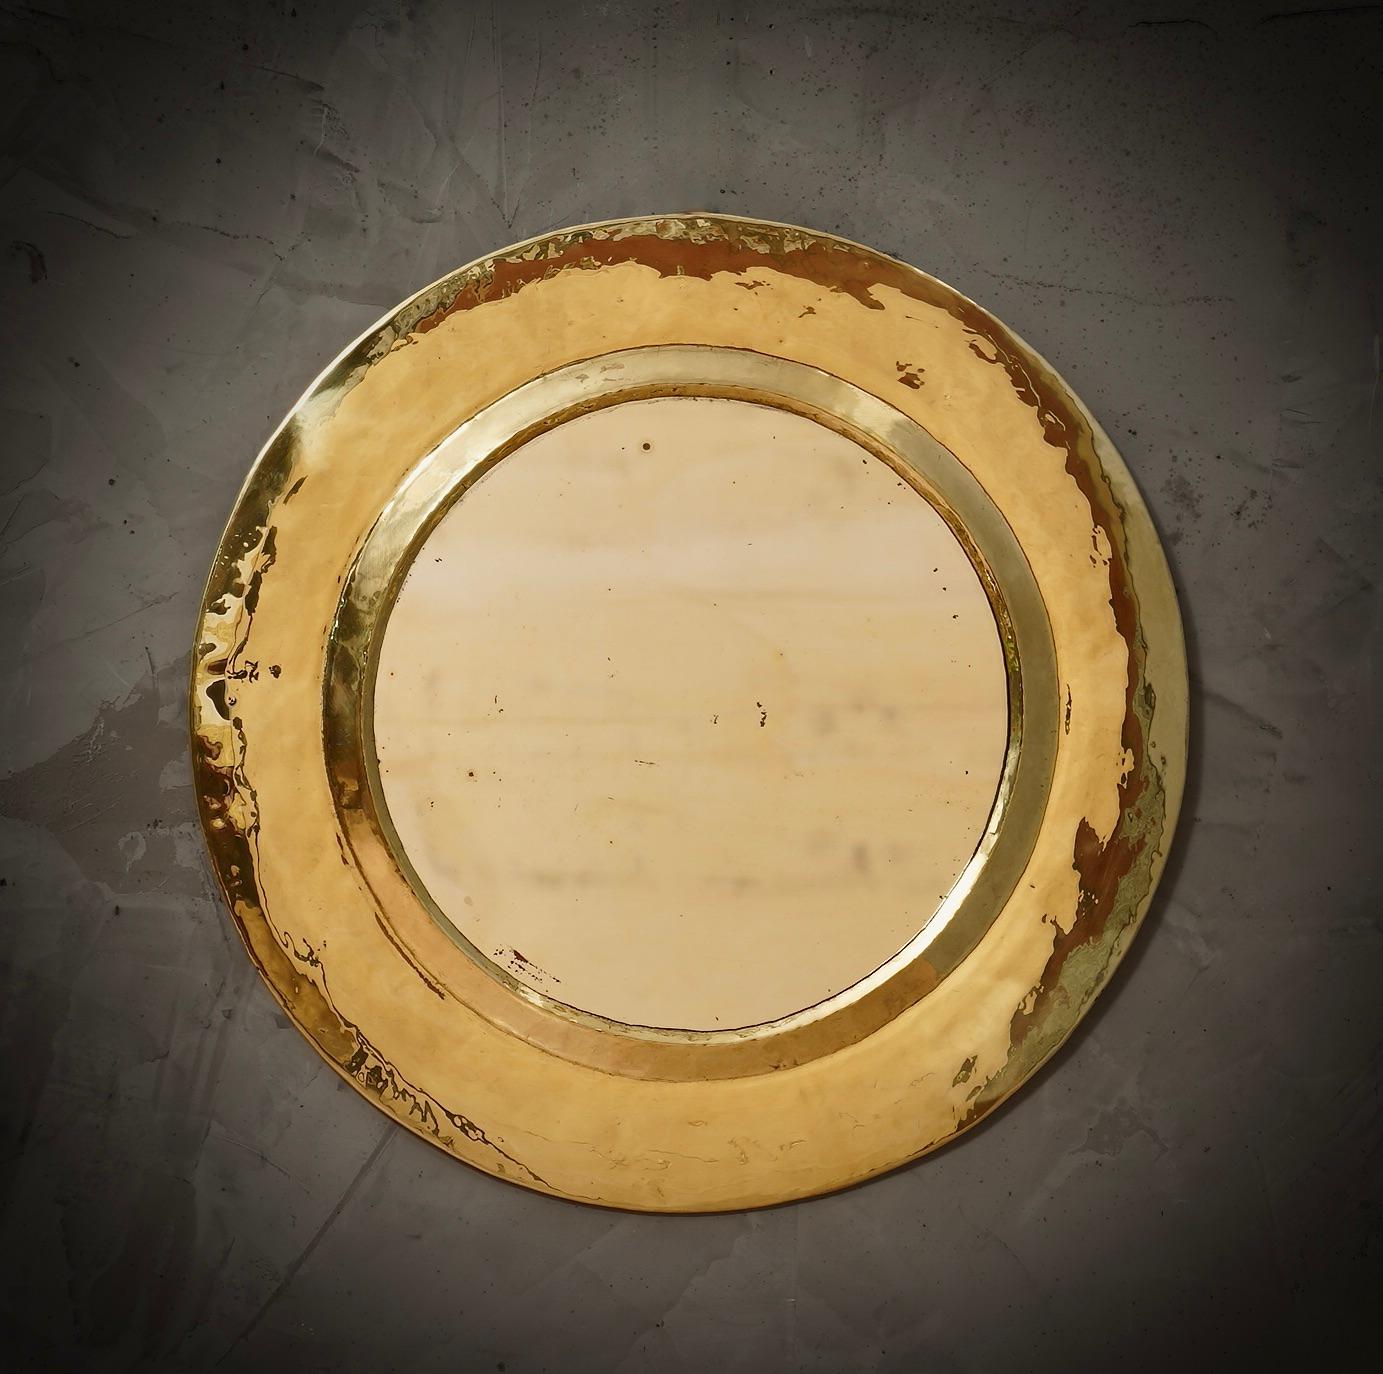 Simple finishes, a real sun shine, this mirror is truly one of a kind. Simple but very very beautiful design.

The mirror is round and small in size. It is composed of a large hand-crafted brass molding. Inside the frame is the small glass mirror.